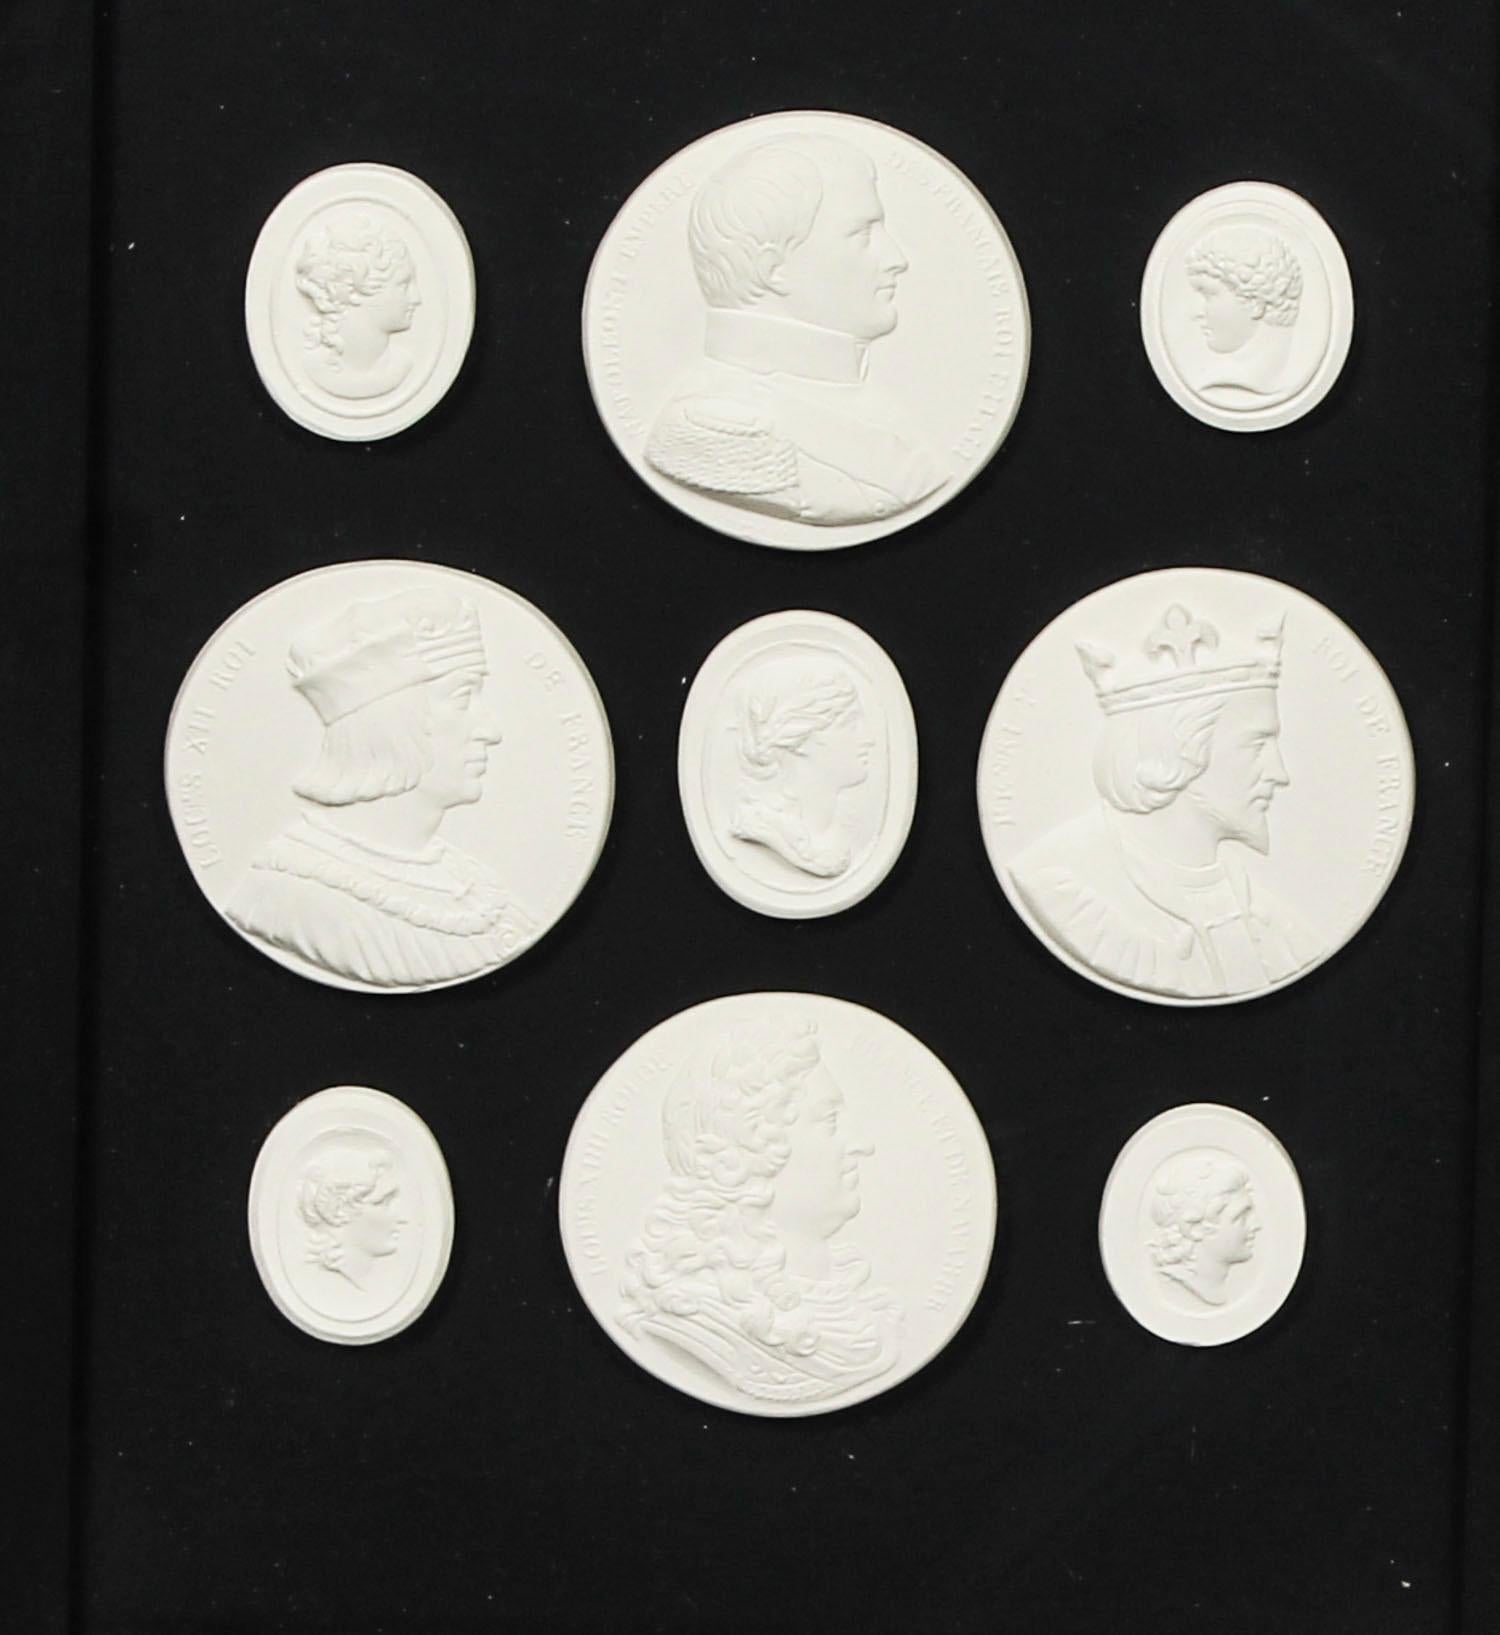 A decorative group of framed plaster Grand Tour intaglios of various historical figures dating from the 19th Century.

The intaglios are beautifully mounted on the original black ground in a rectangular gilt frame.

They consist of nine oval